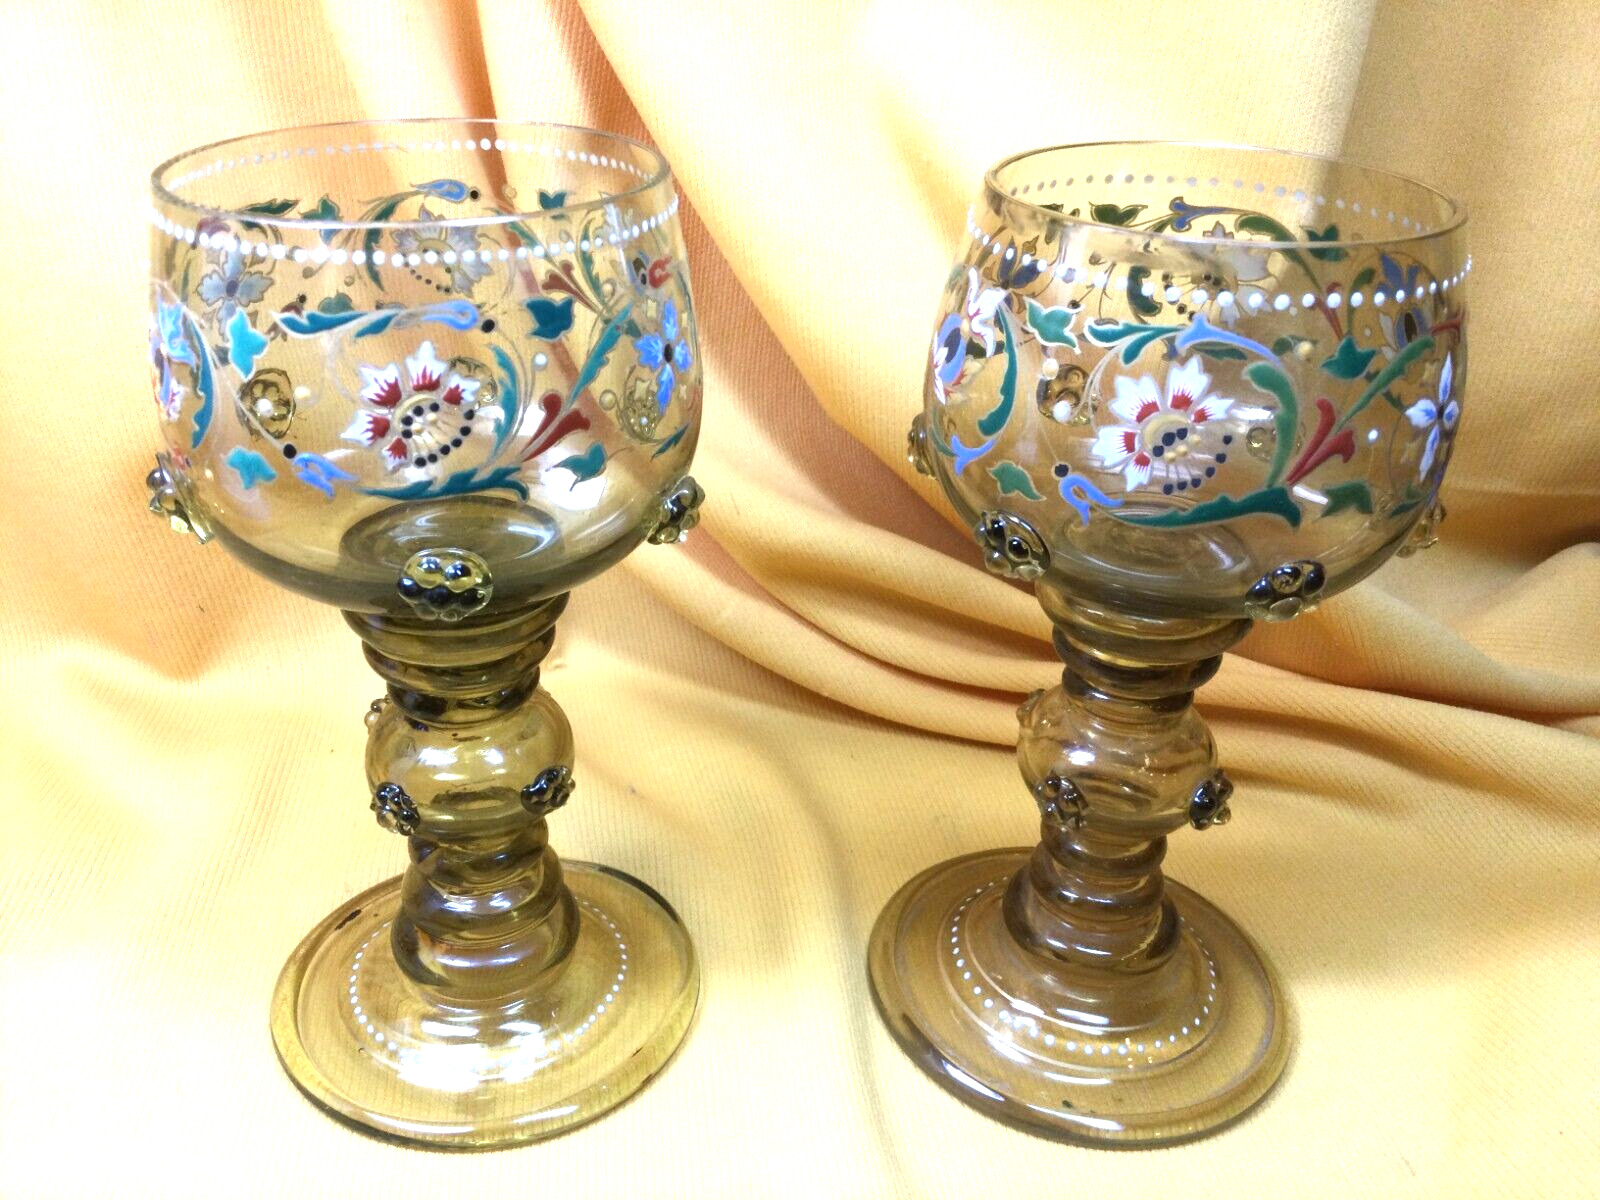 Bohemian Theresienthal Enamel Floral Design Wine Goblets with Prunts